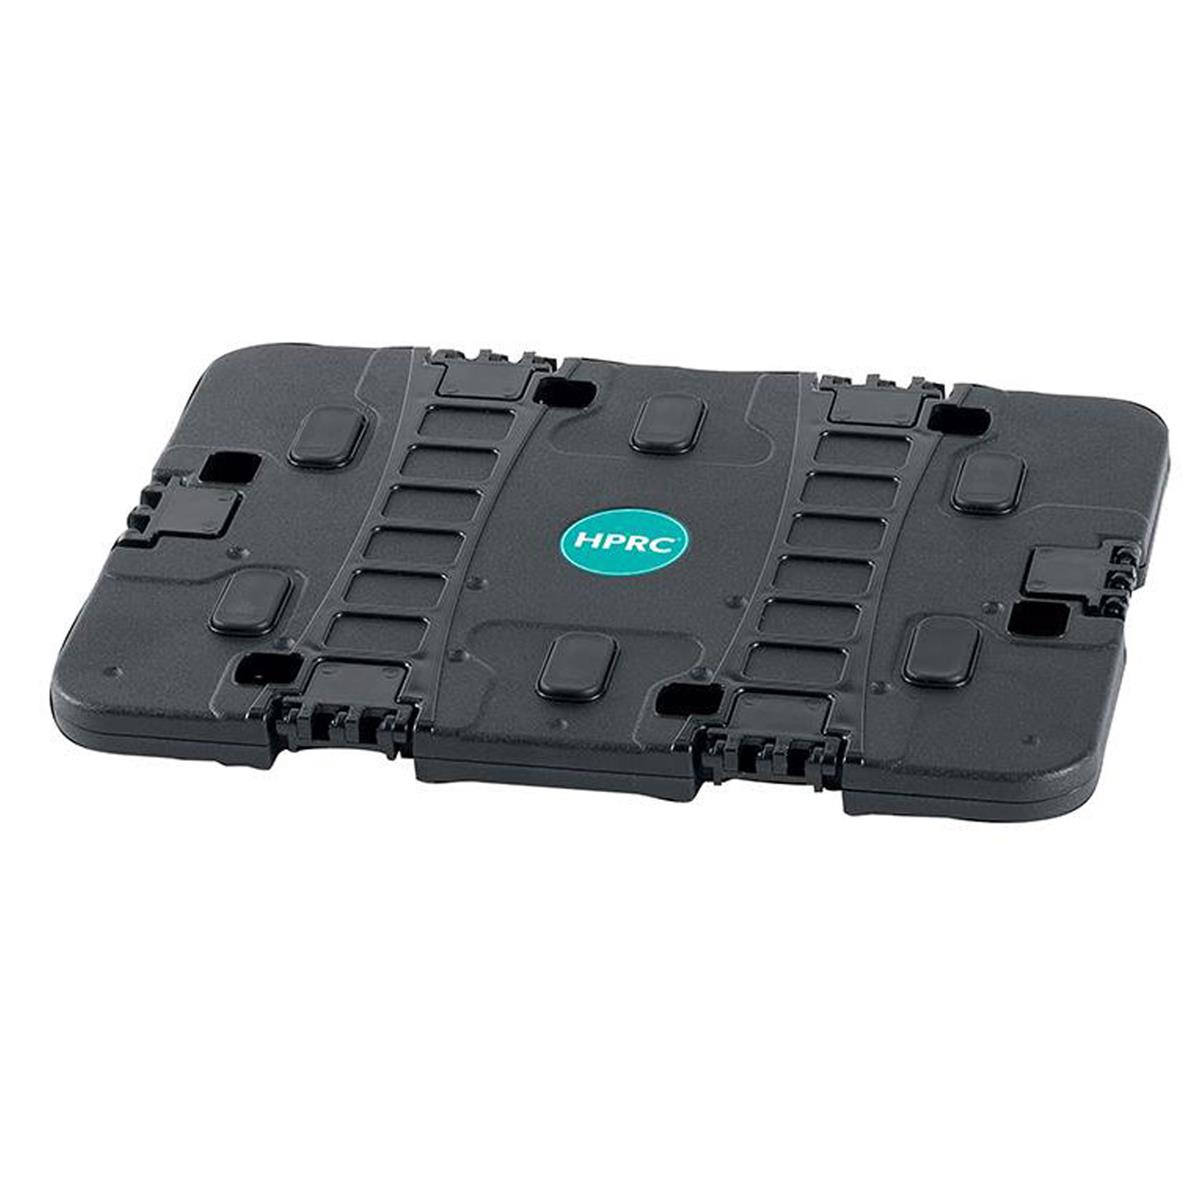 Image of HPRC 0500 Support Plate for All Laptops